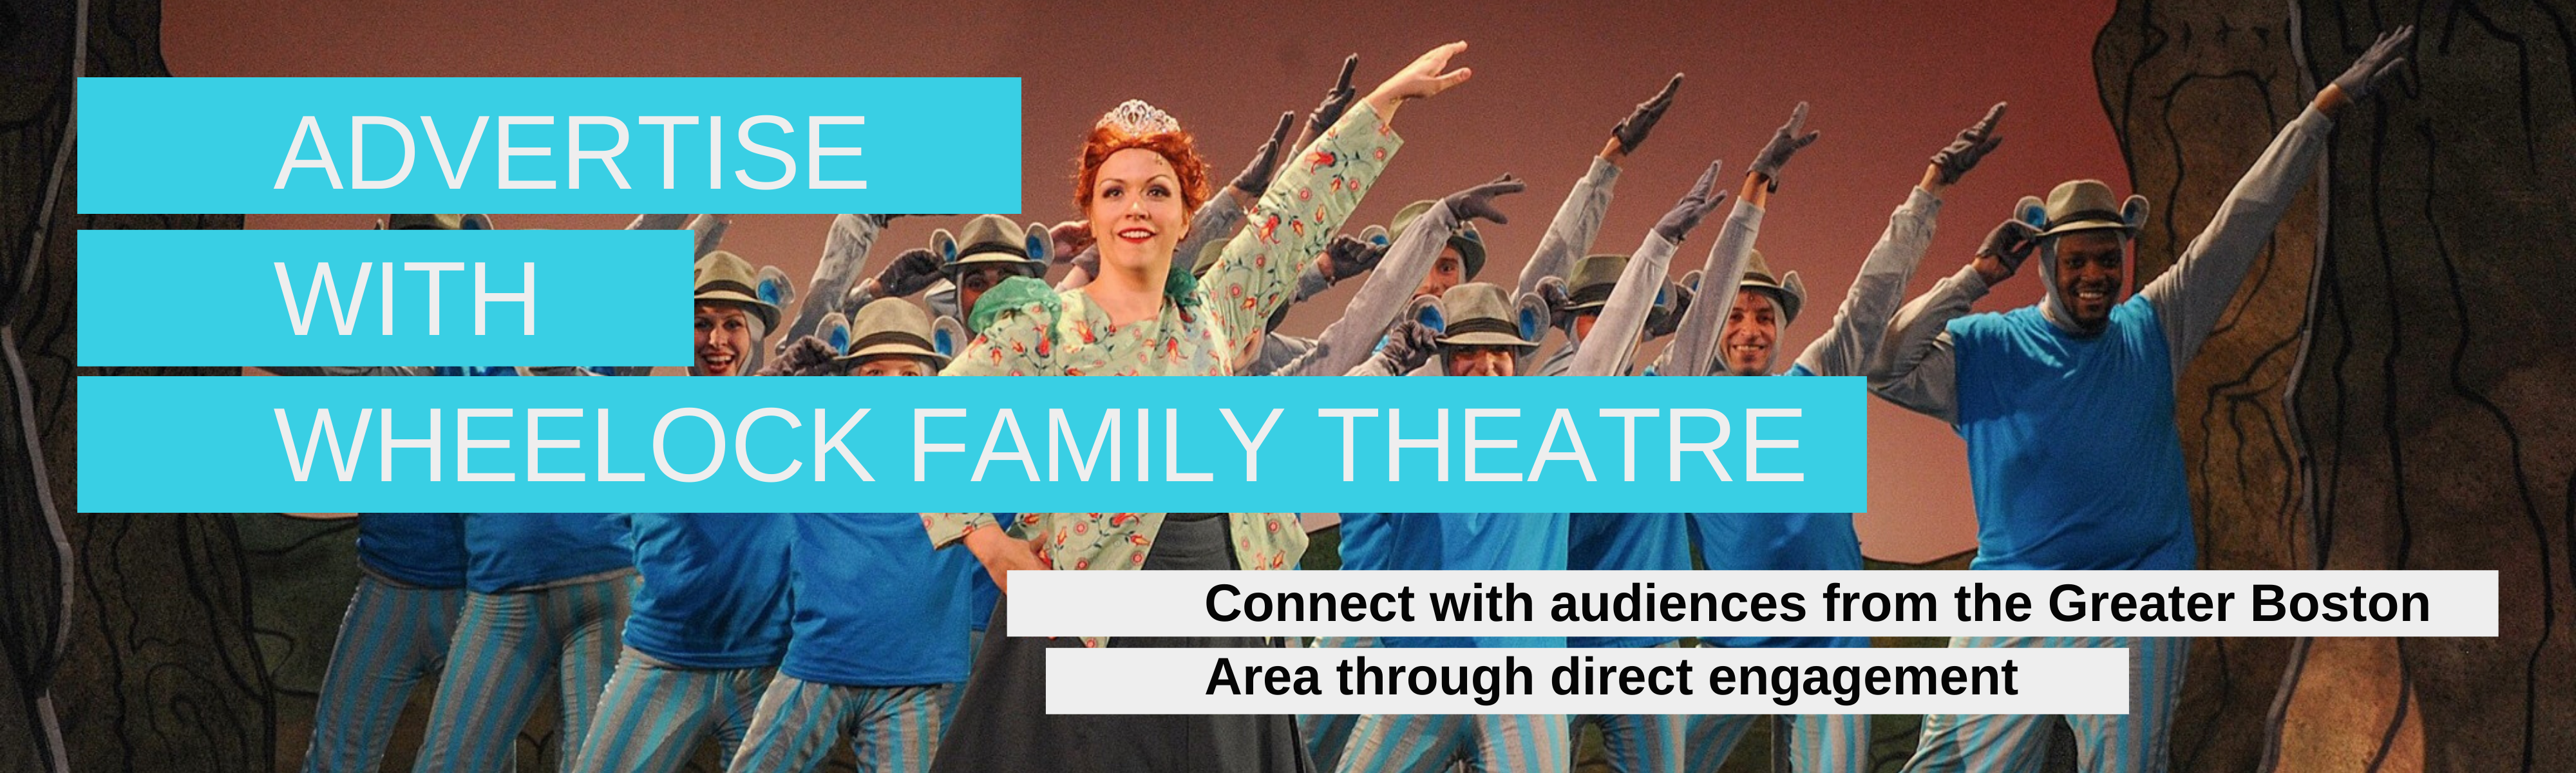 Advertise with Wheelock Family Theatre